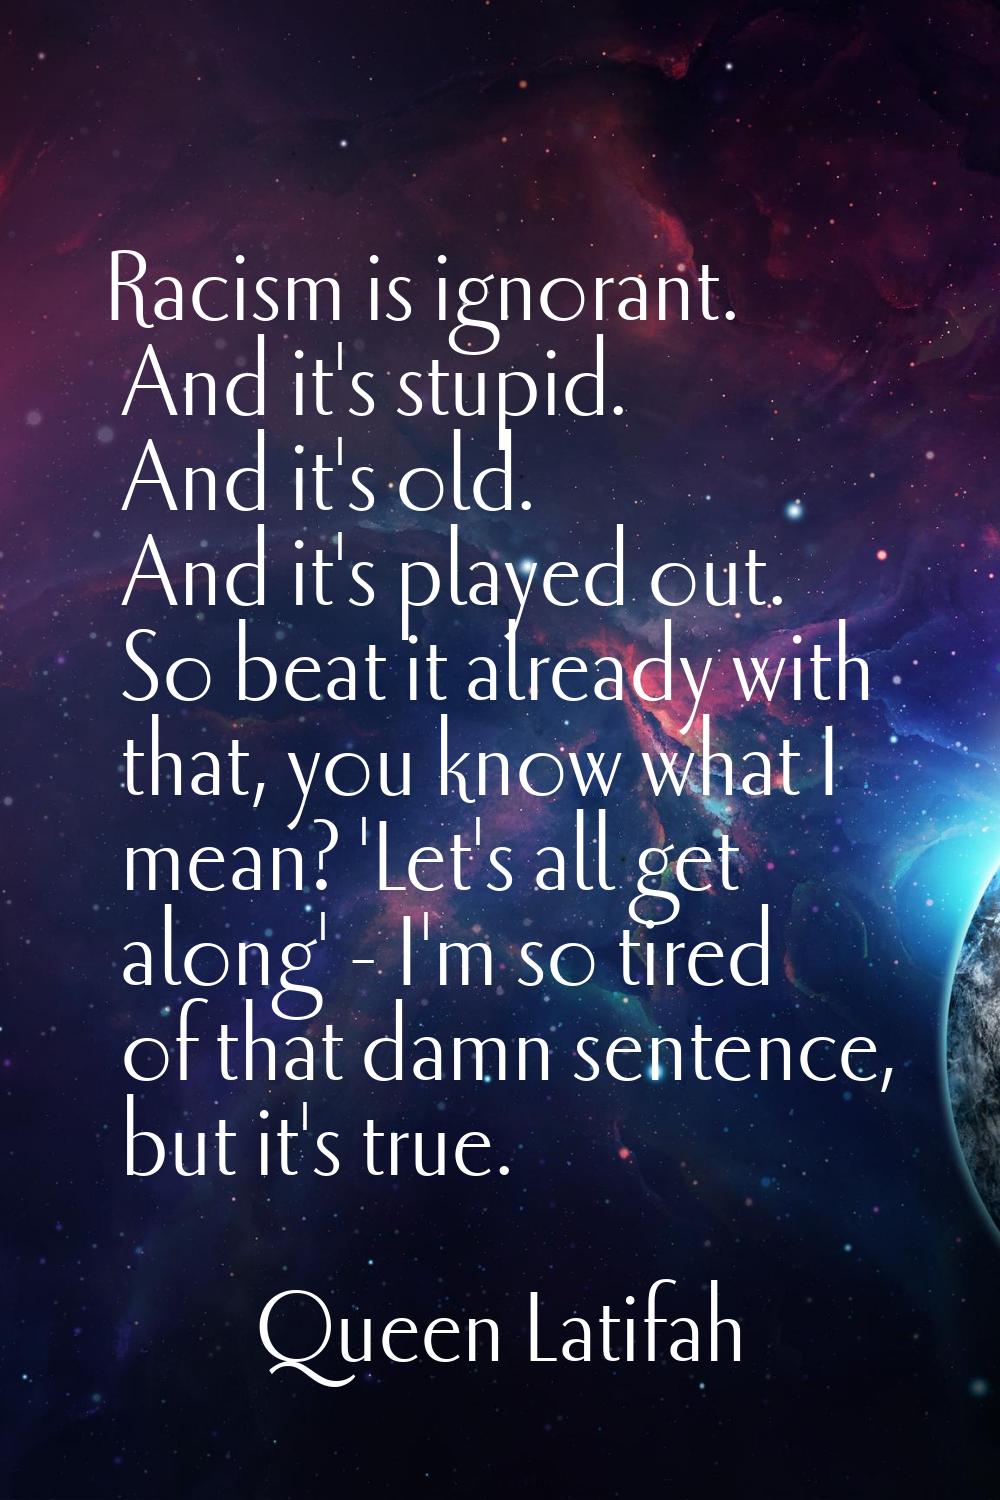 Racism is ignorant. And it's stupid. And it's old. And it's played out. So beat it already with tha